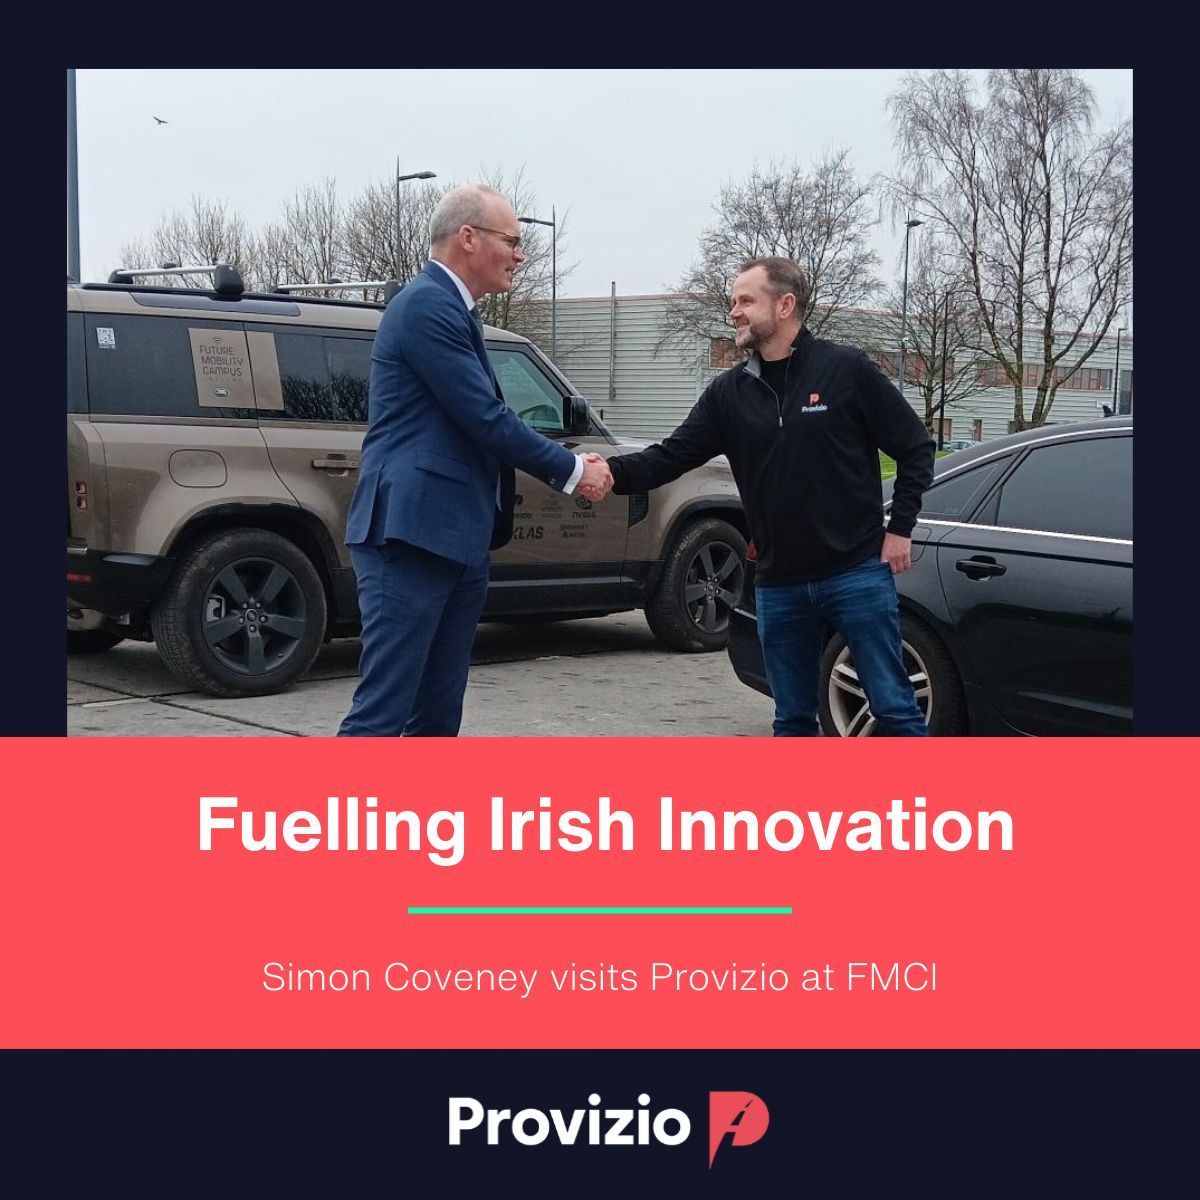 Exciting day at Provizio! Delighted to welcome Minister Simon Coveney to our FMCI R&D hub, where we showcased our innovative 5D Perception technology. Thanks for the support from Enterprise Ireland and the department - fuelling Irish innovation! 🇮🇪 #Provizio #EnterpriseIreland